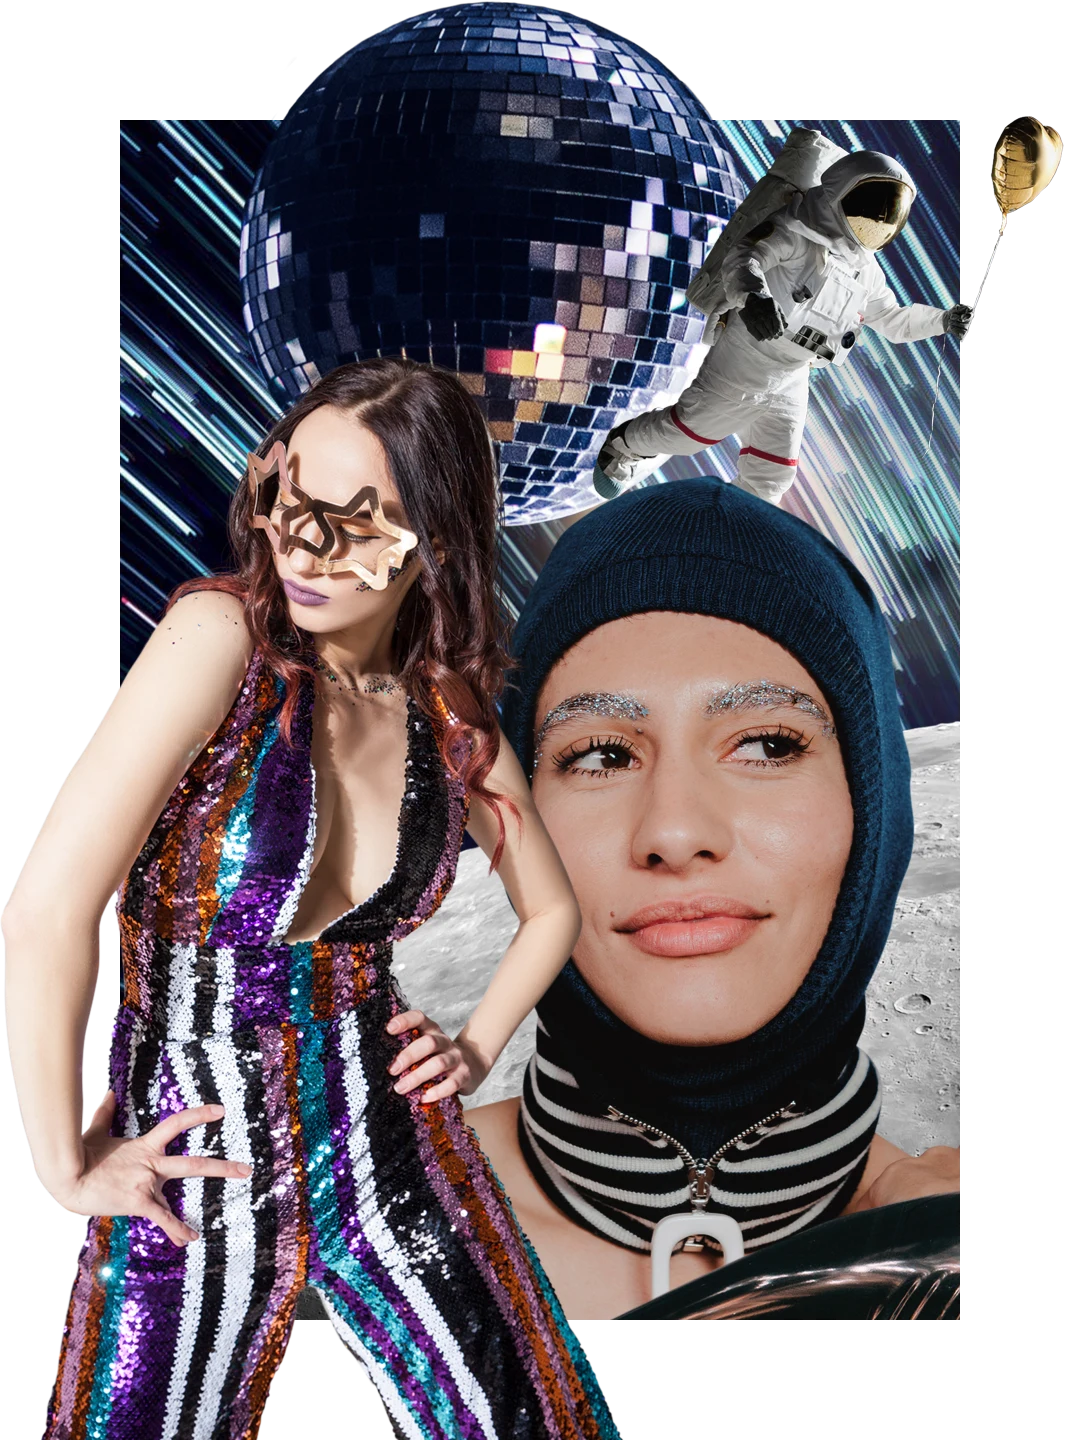 Backdrop of outer space with a large disco ball and floating astronaut at the top. A white woman is on the left wearing a striped jumpsuit and star-shaped glasses. An Arab woman in a black balaclava is on the right, with a large moon in the background.
